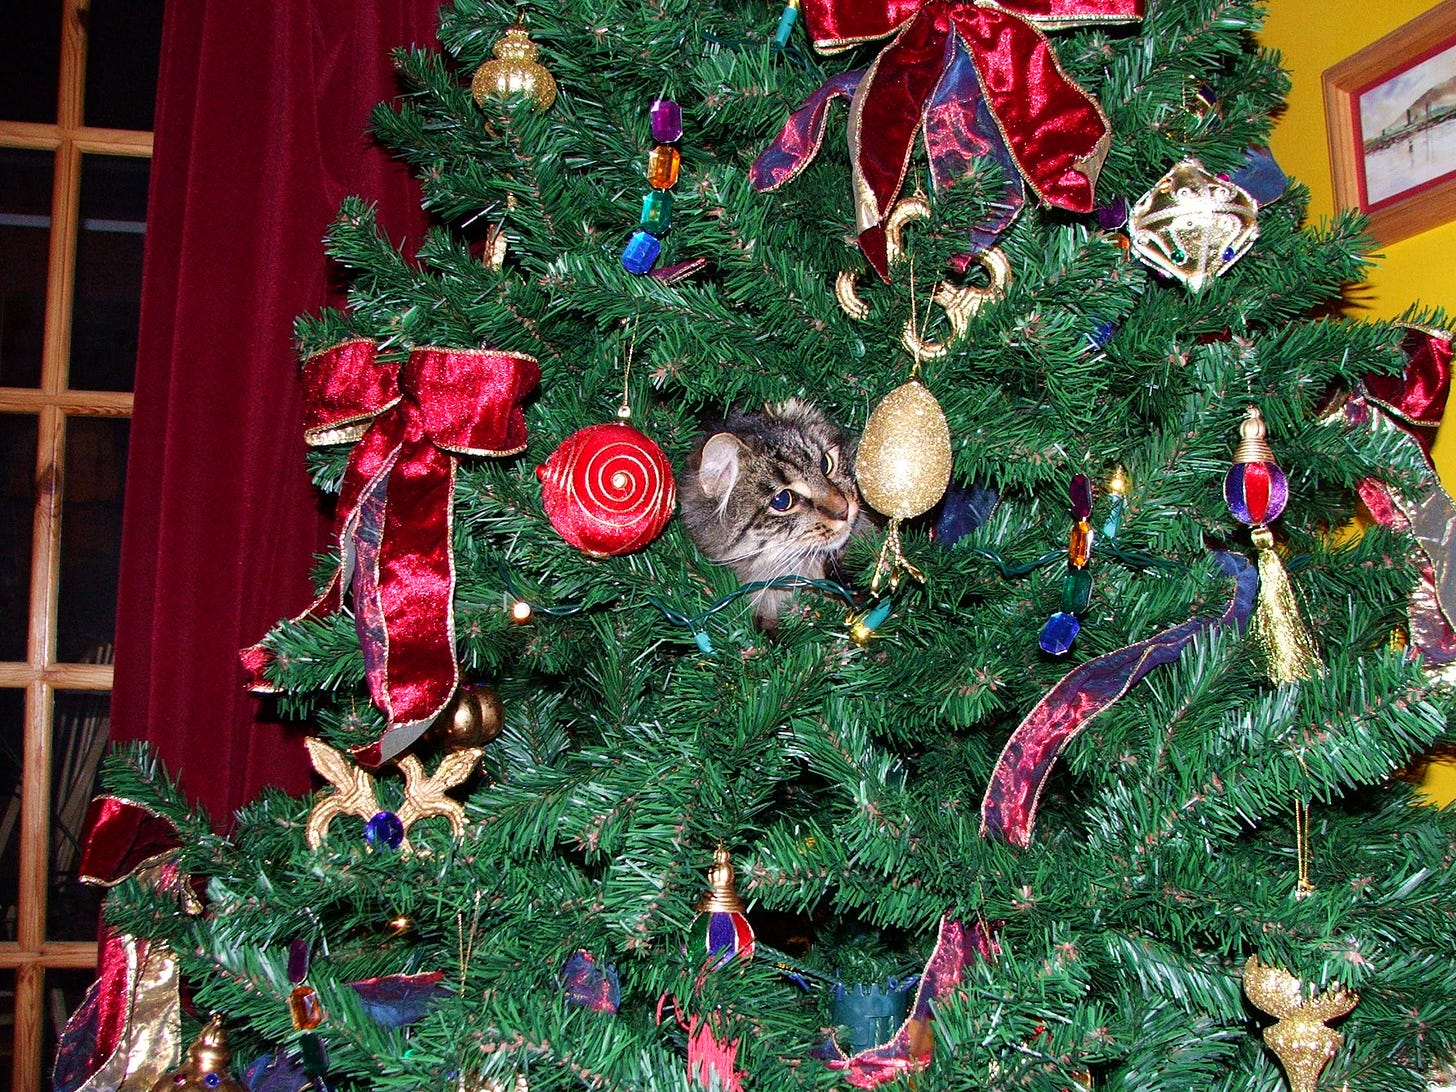 A beautiful cat in a Christmas tree.